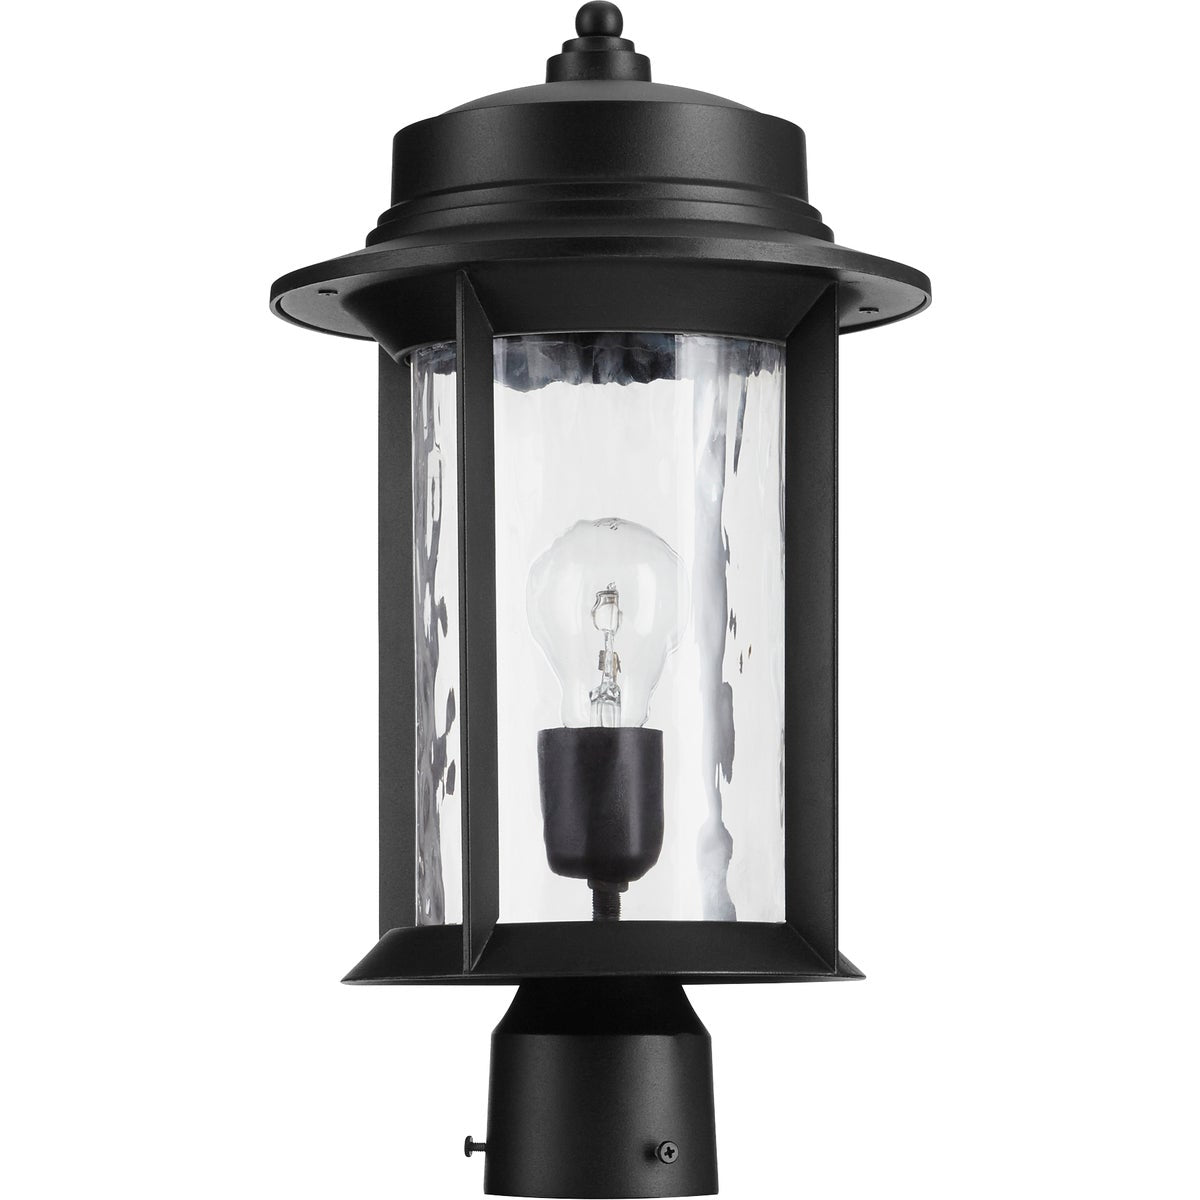 A mid century modern outdoor post light with a clean-lined drum silhouette and hammered glass panes. Fits a single dimmable 100W bulb (not included).